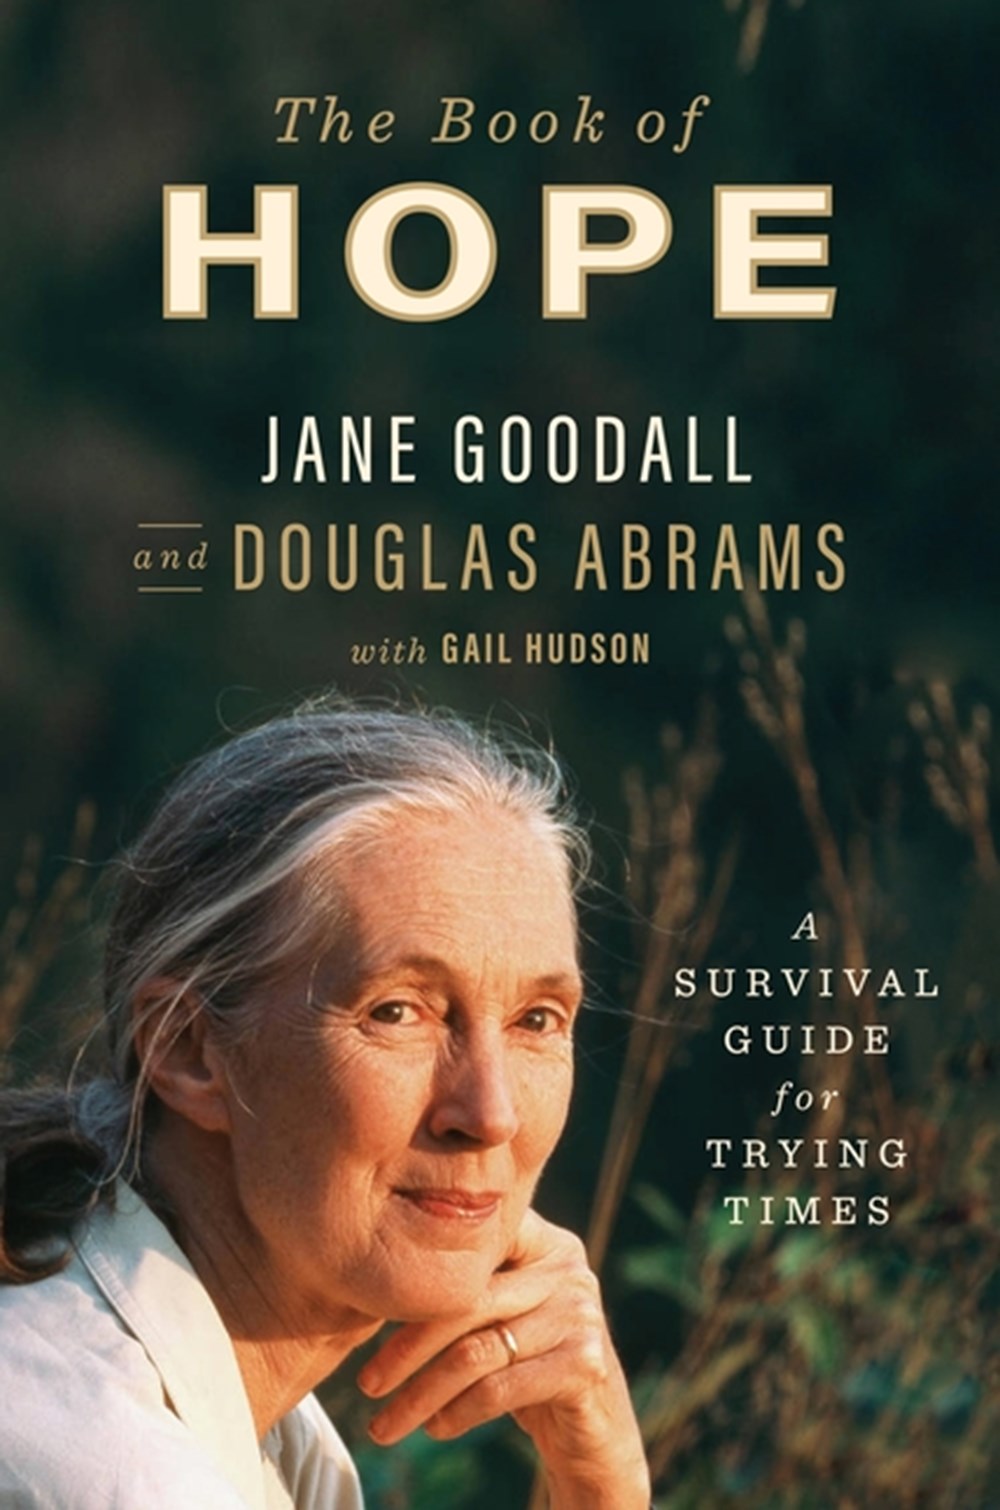 Book of Hope A Survival Guide for Trying Times